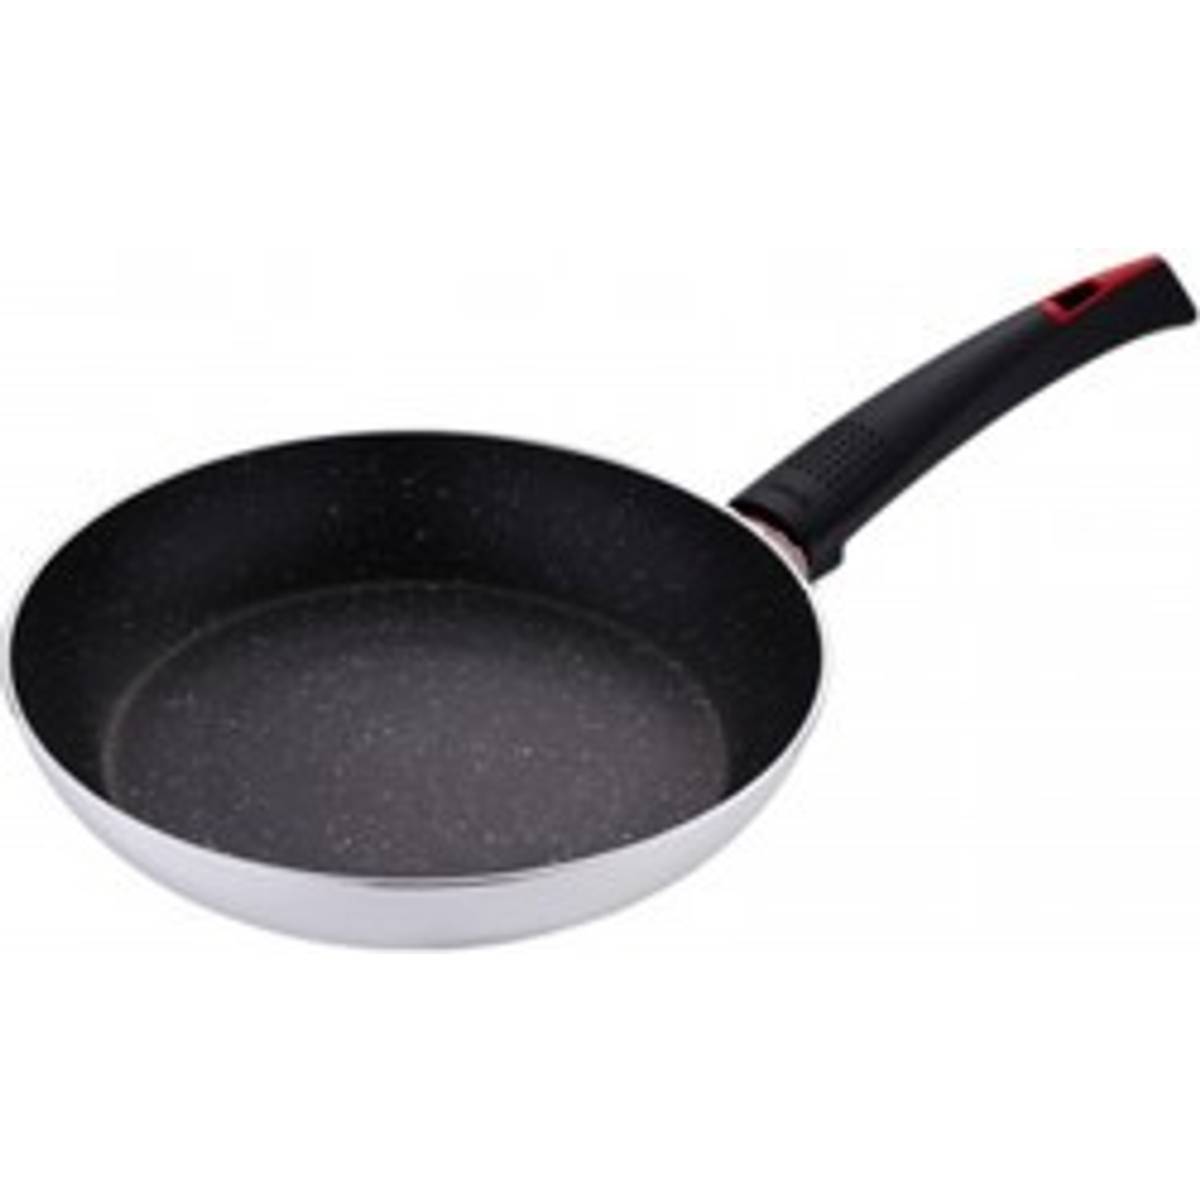 Compare best Bergner Cookware prices on the market - PriceRunner